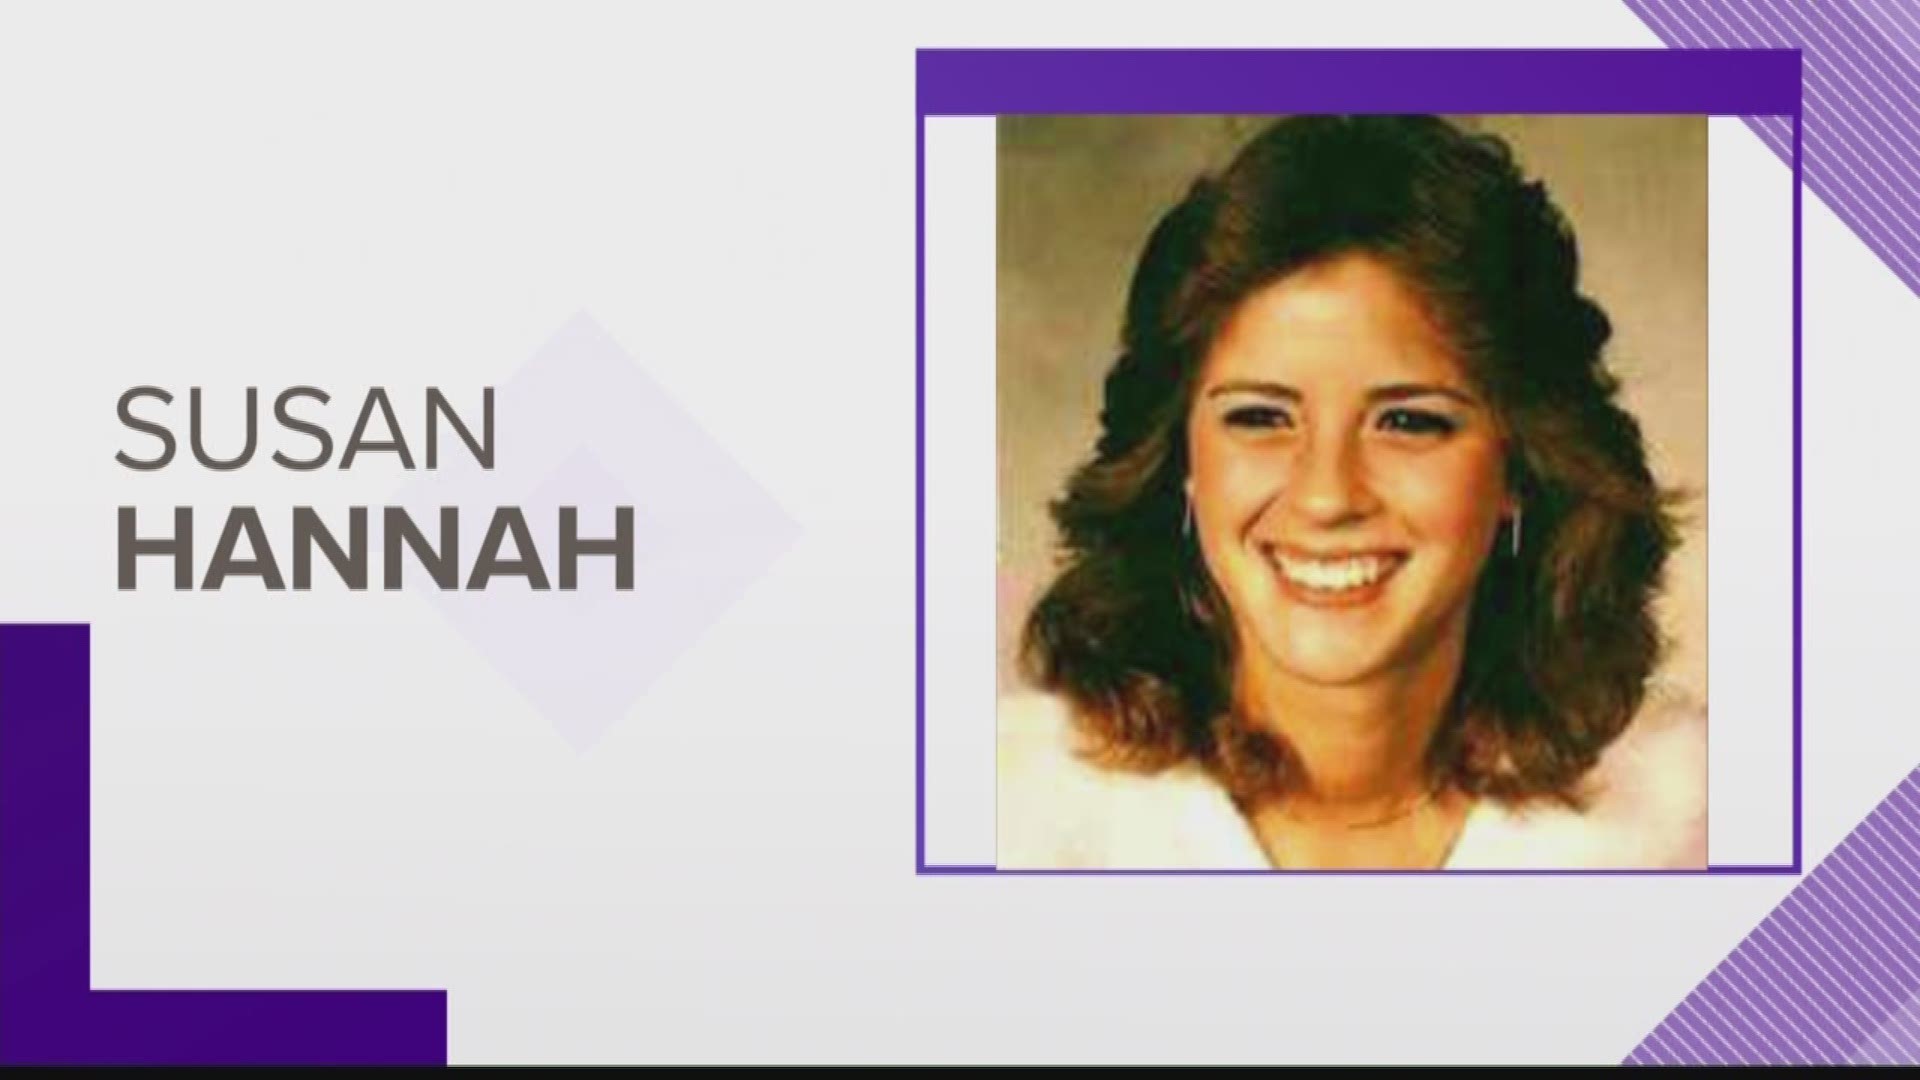 The Maine State Police are asking the public for help solving the 1992 cold case of 22-year-old Susan Hannah.